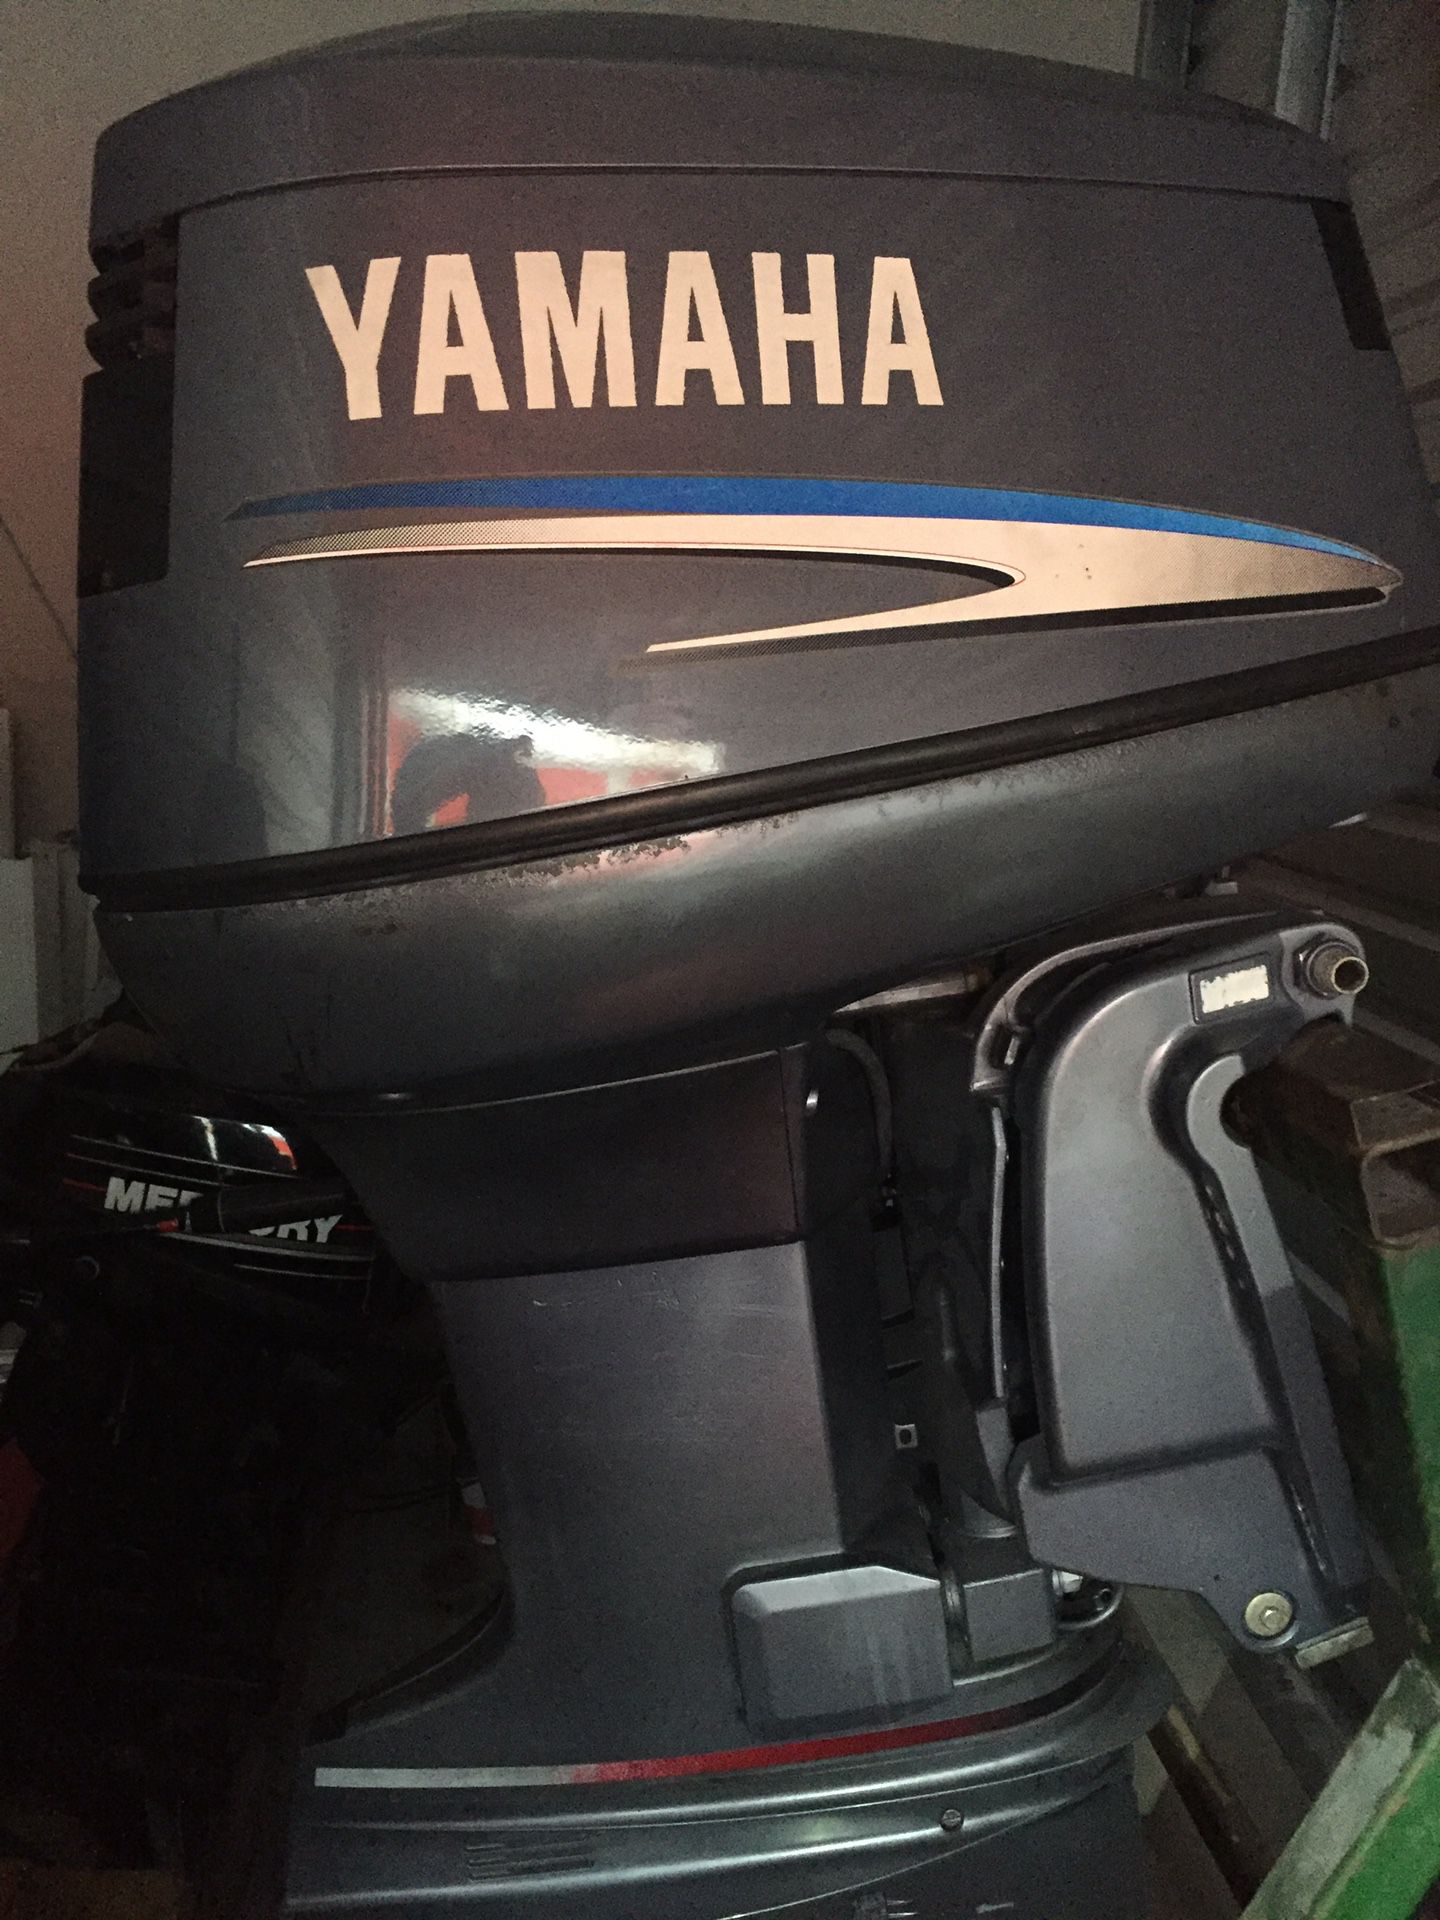 Yamaha 130hp 130 hp Outboard Engine Motor 20 inch shaft low hours excellent condition